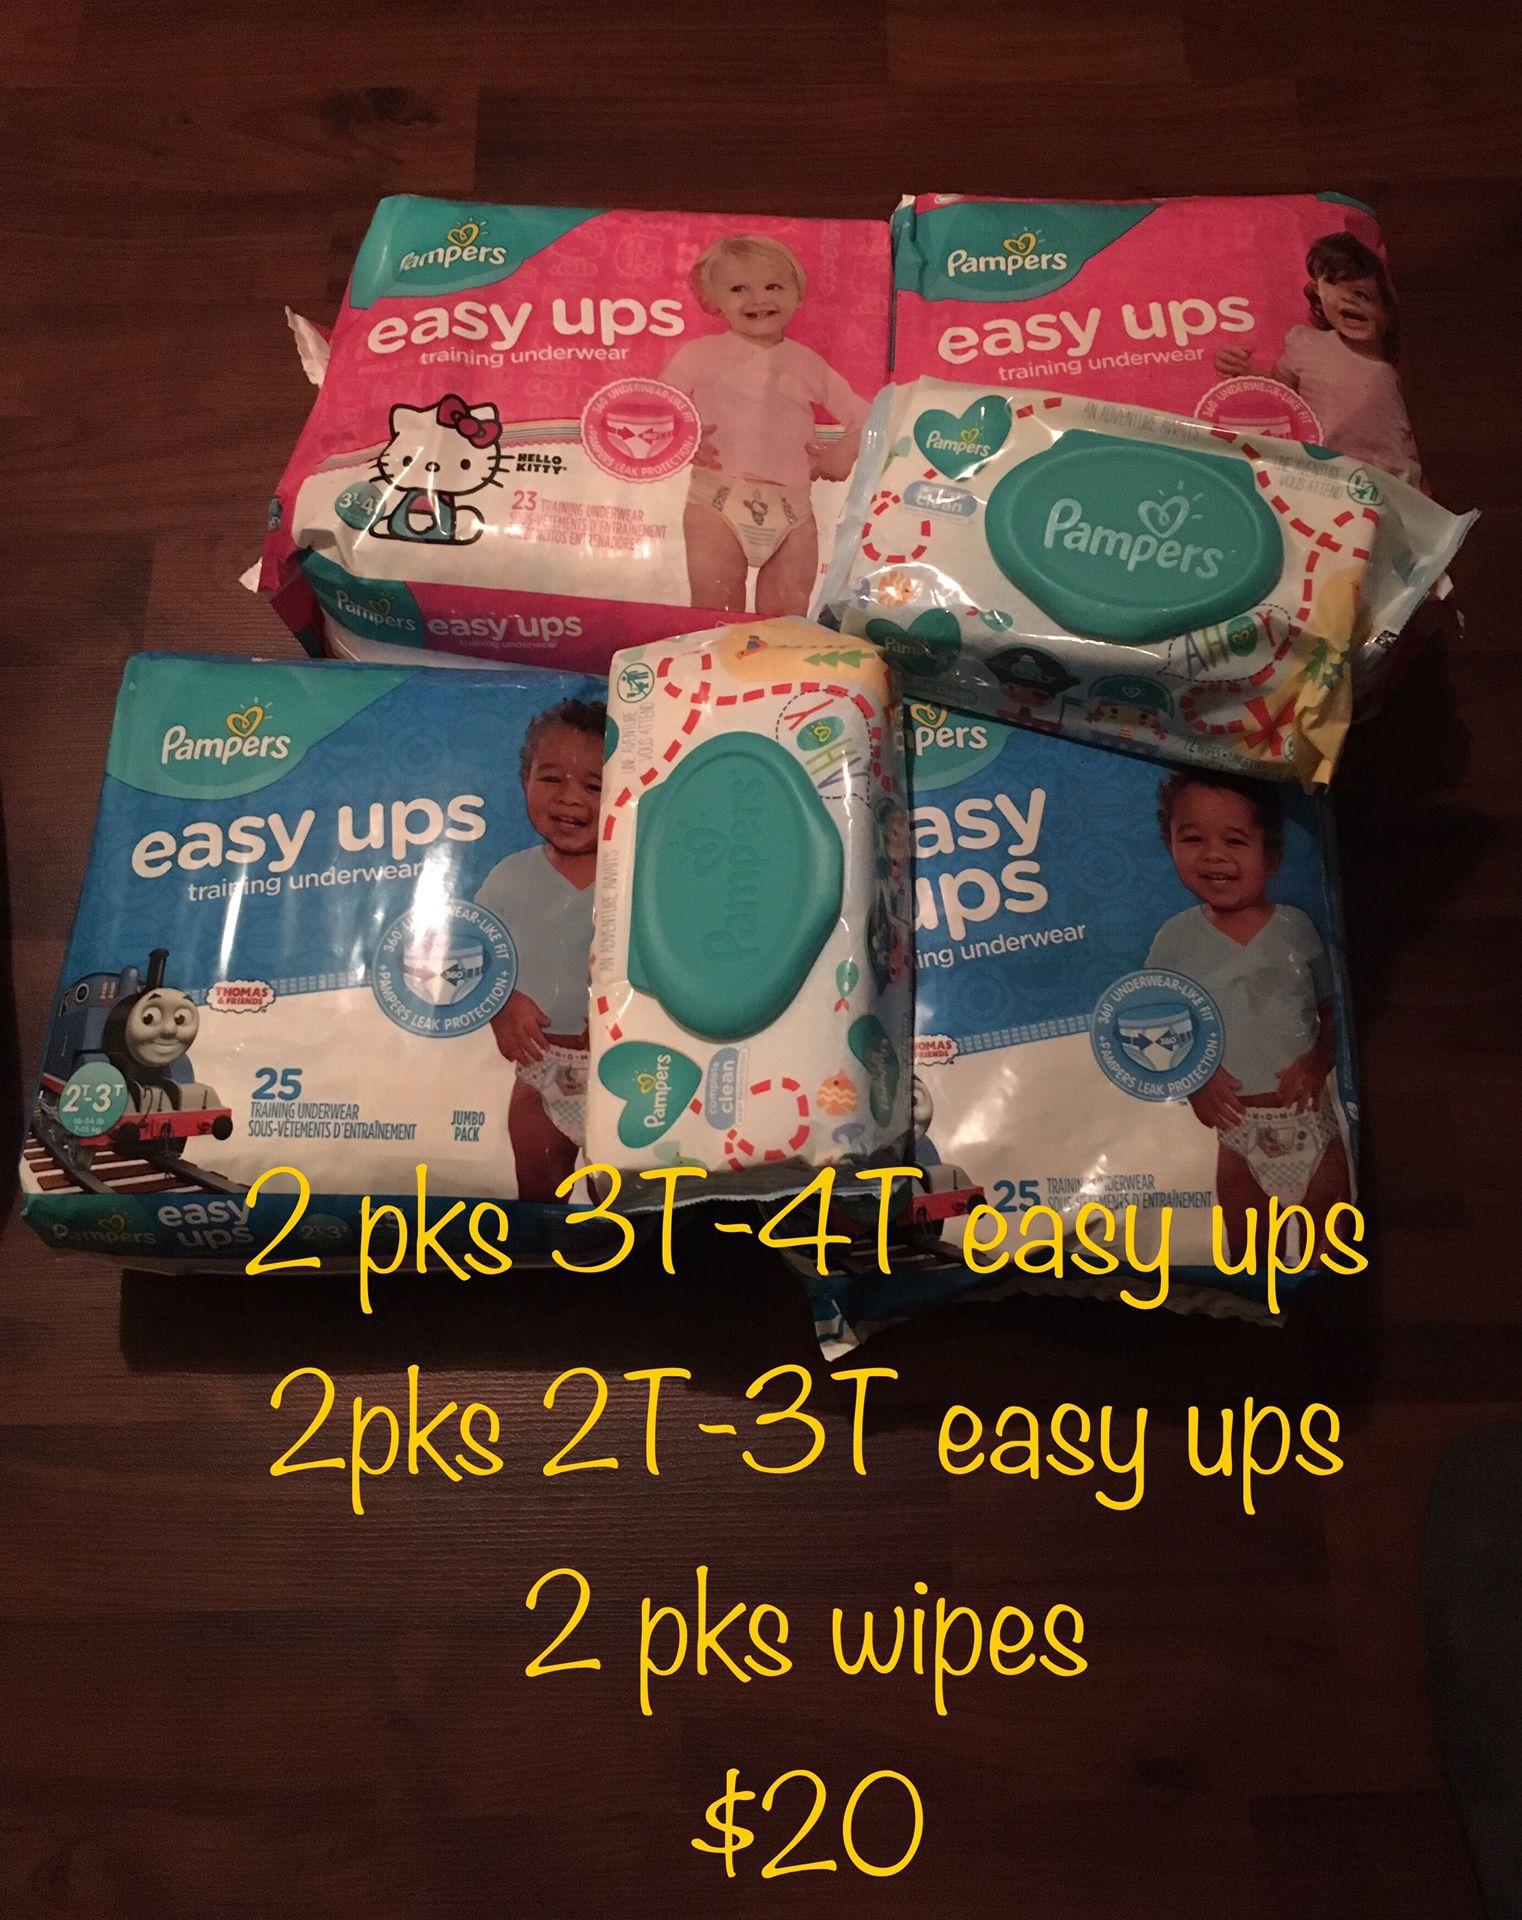 Pampers Easy Ups and Wipes bundle